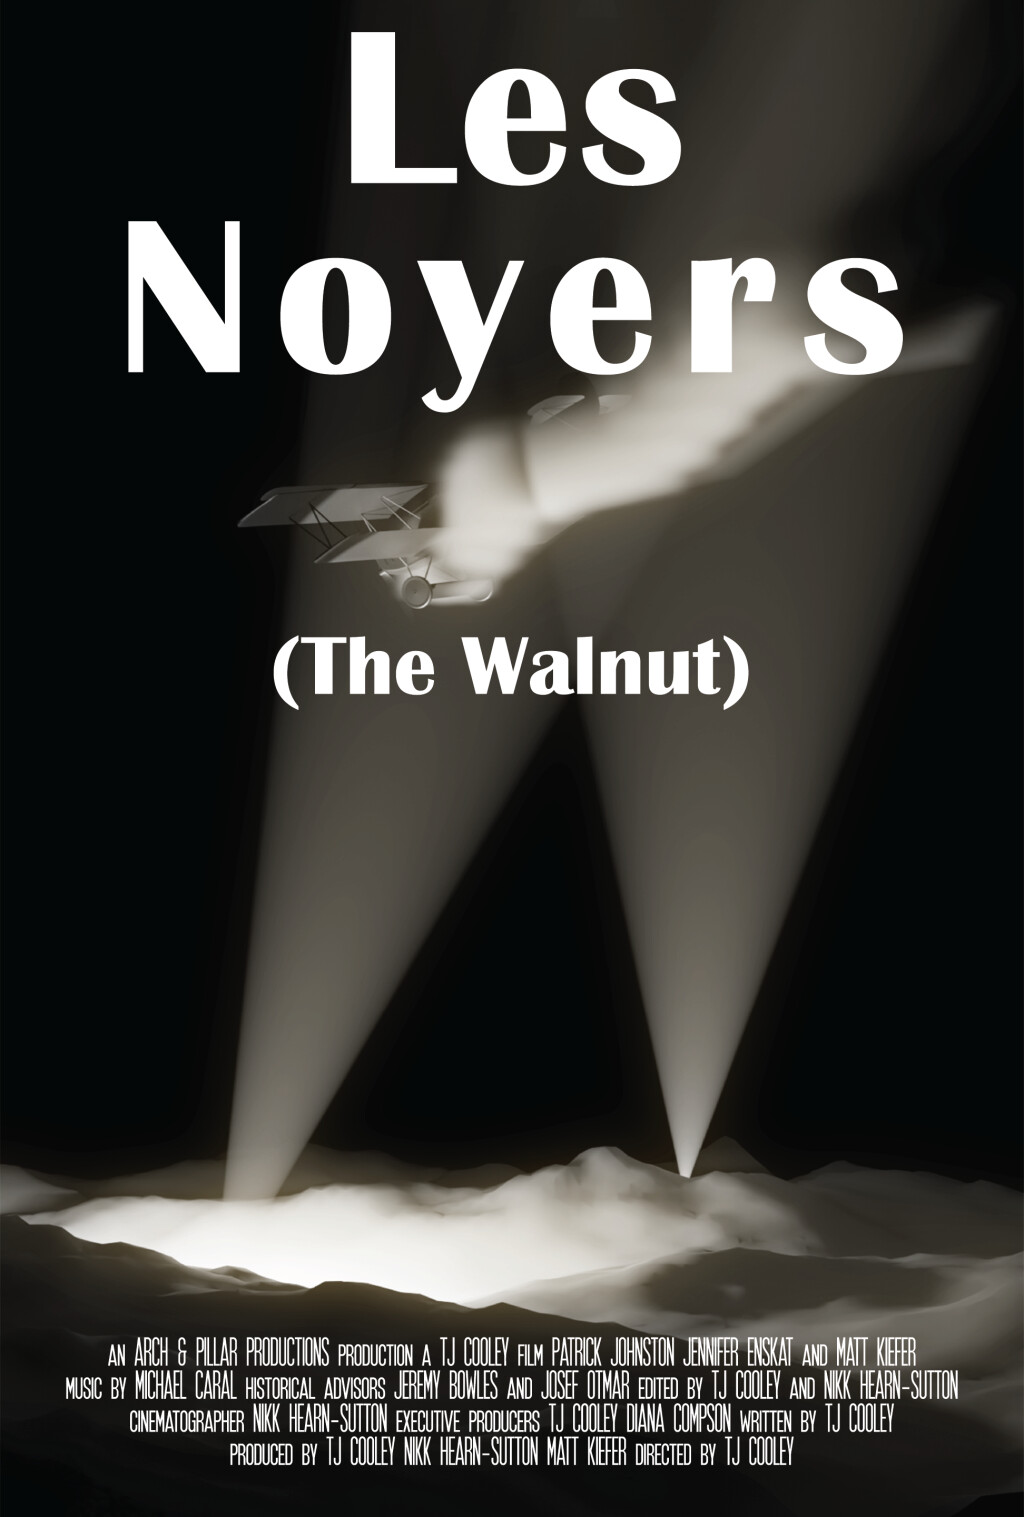 Filmposter for Les Noyers (The Walnut)